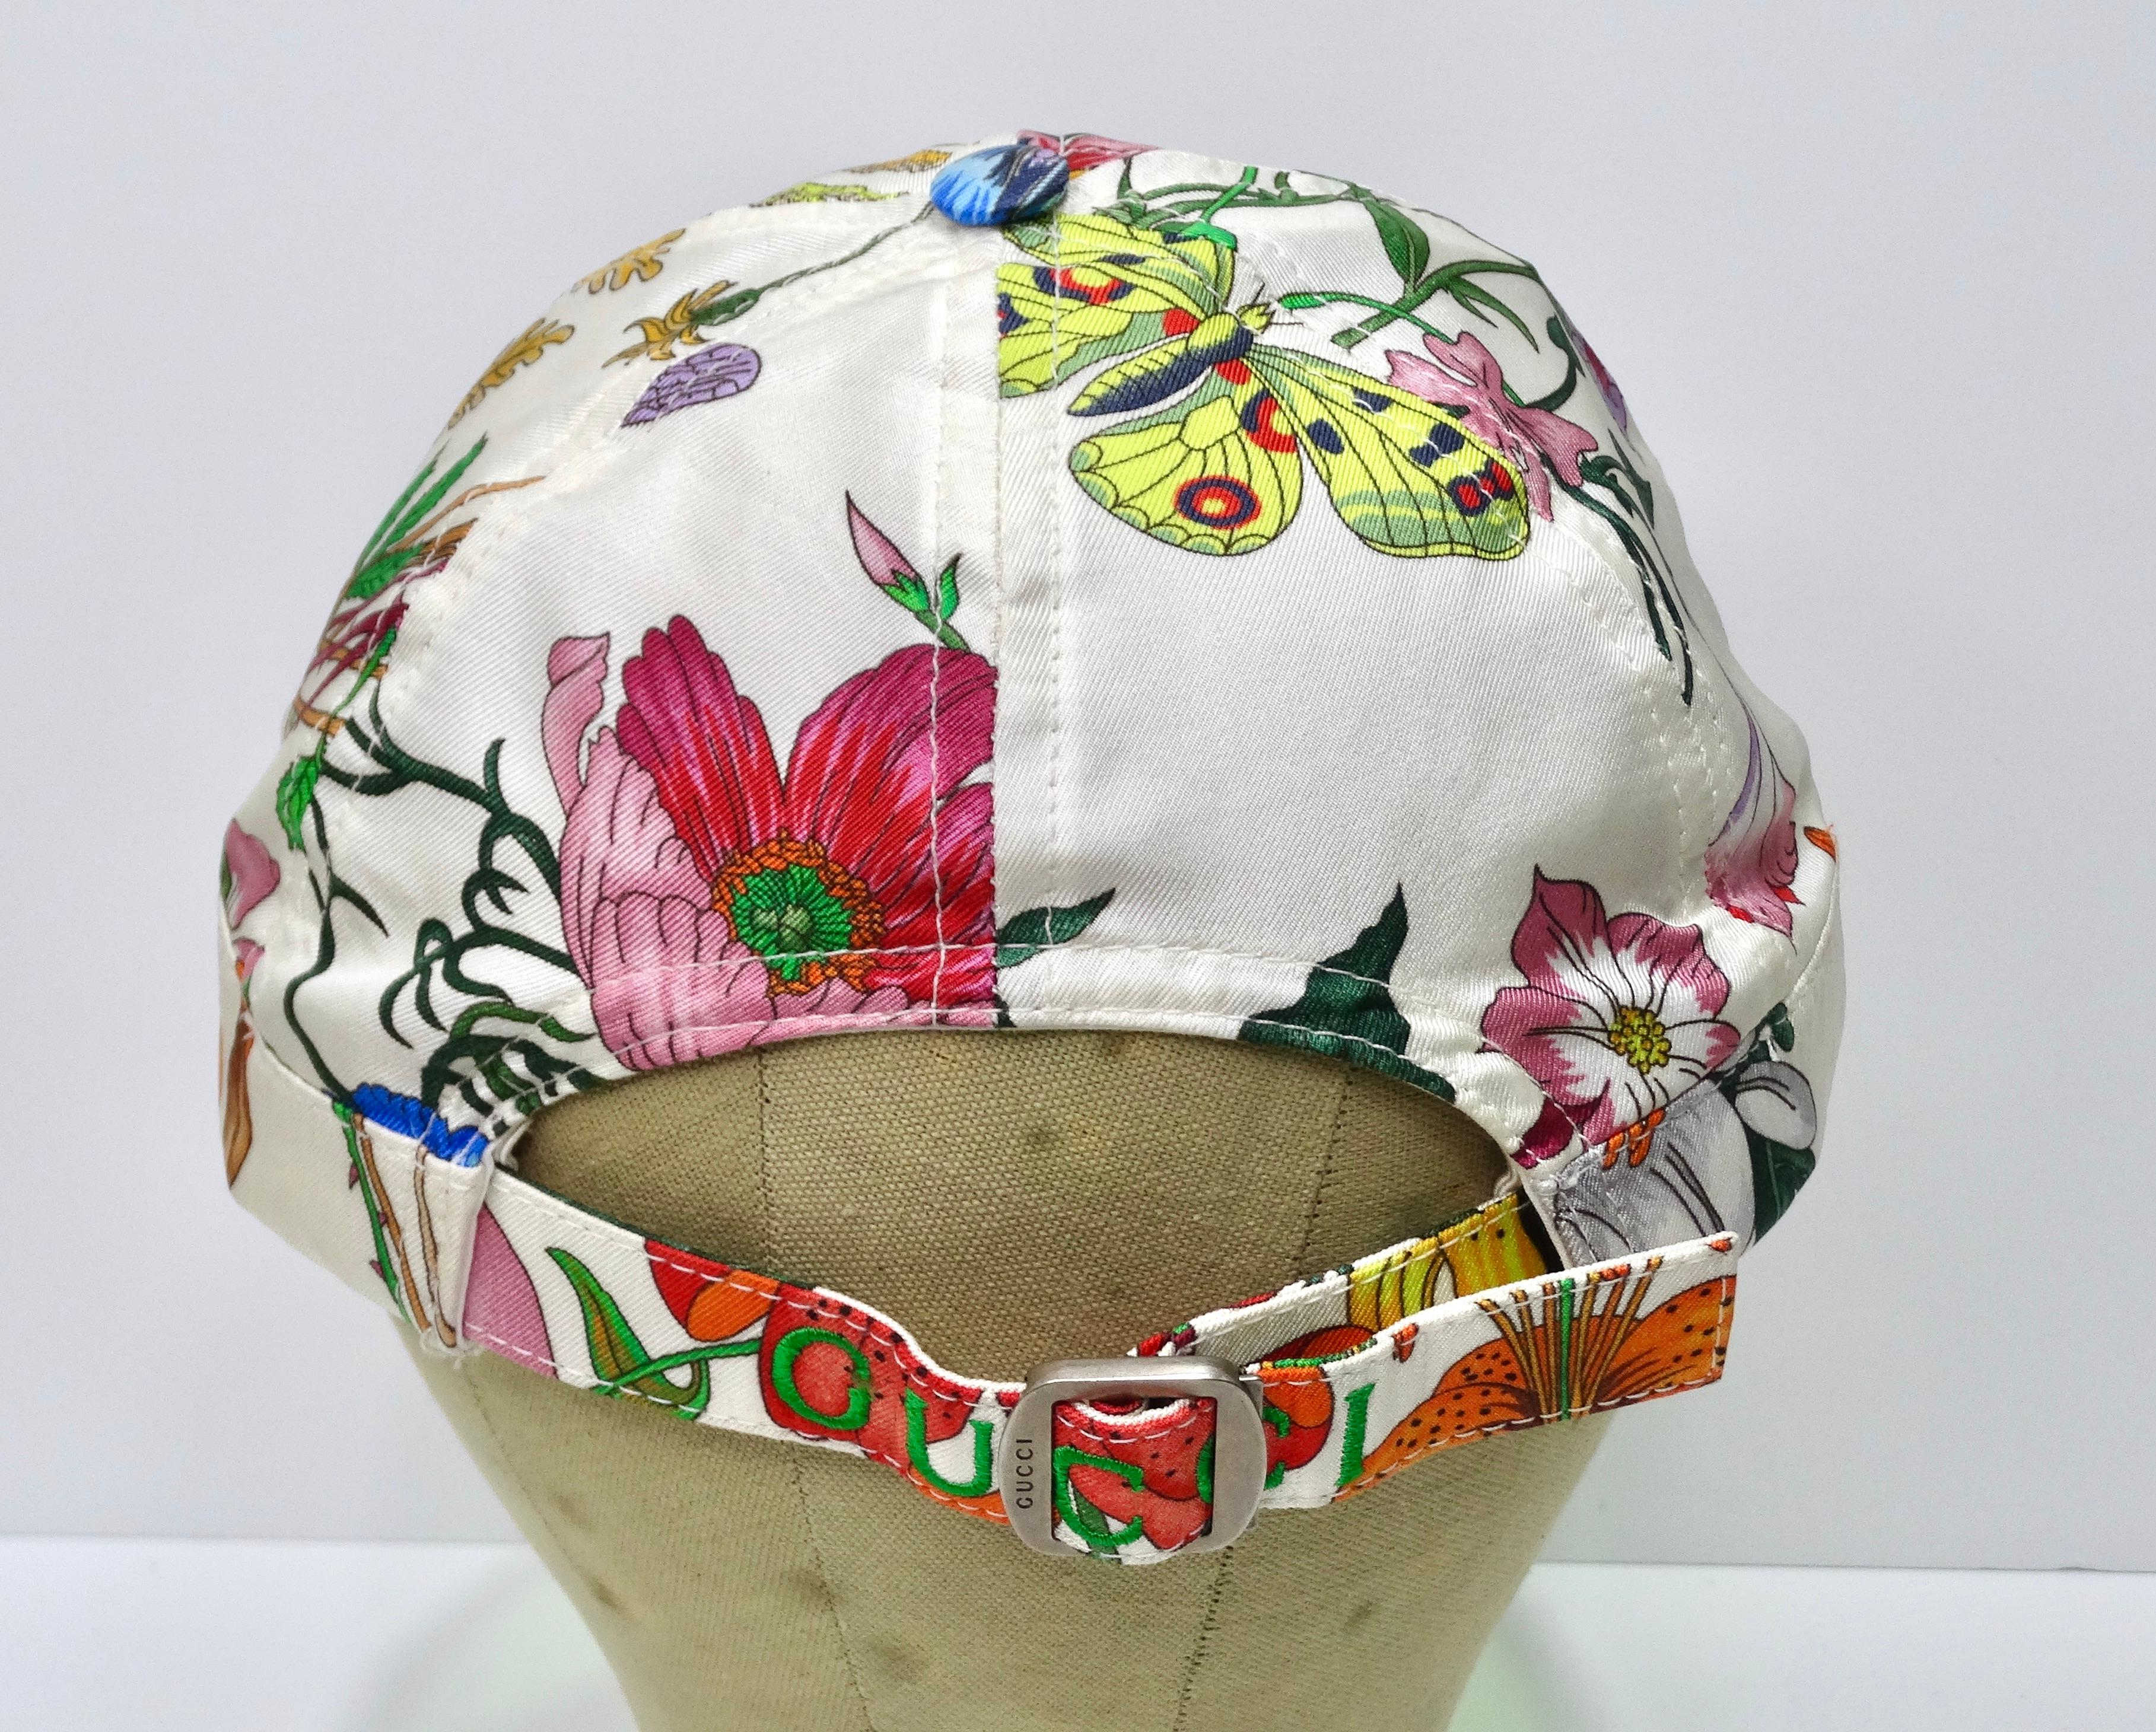 Gucci Floral Print Vinyl Brim Hat In New Condition For Sale In Scottsdale, AZ